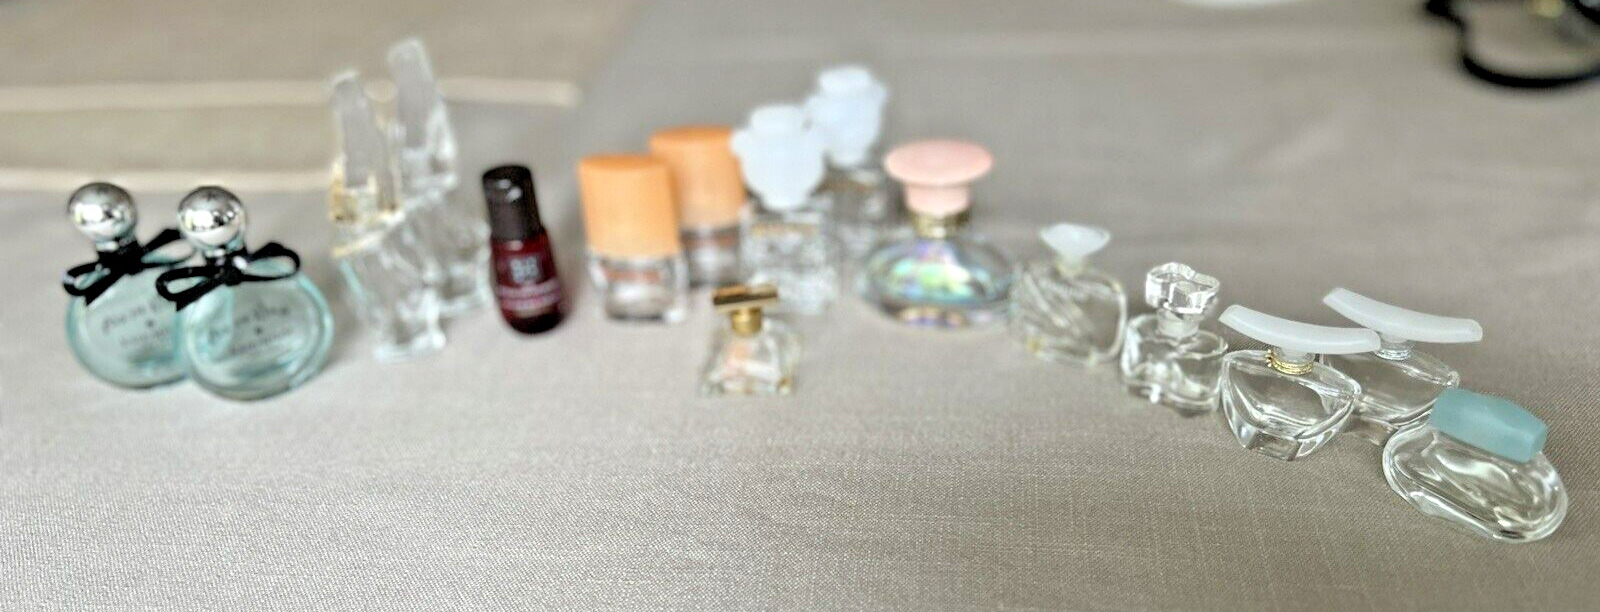 Miniature Perfume Bottle Lot Of 16 Teeny Tiny Collectible